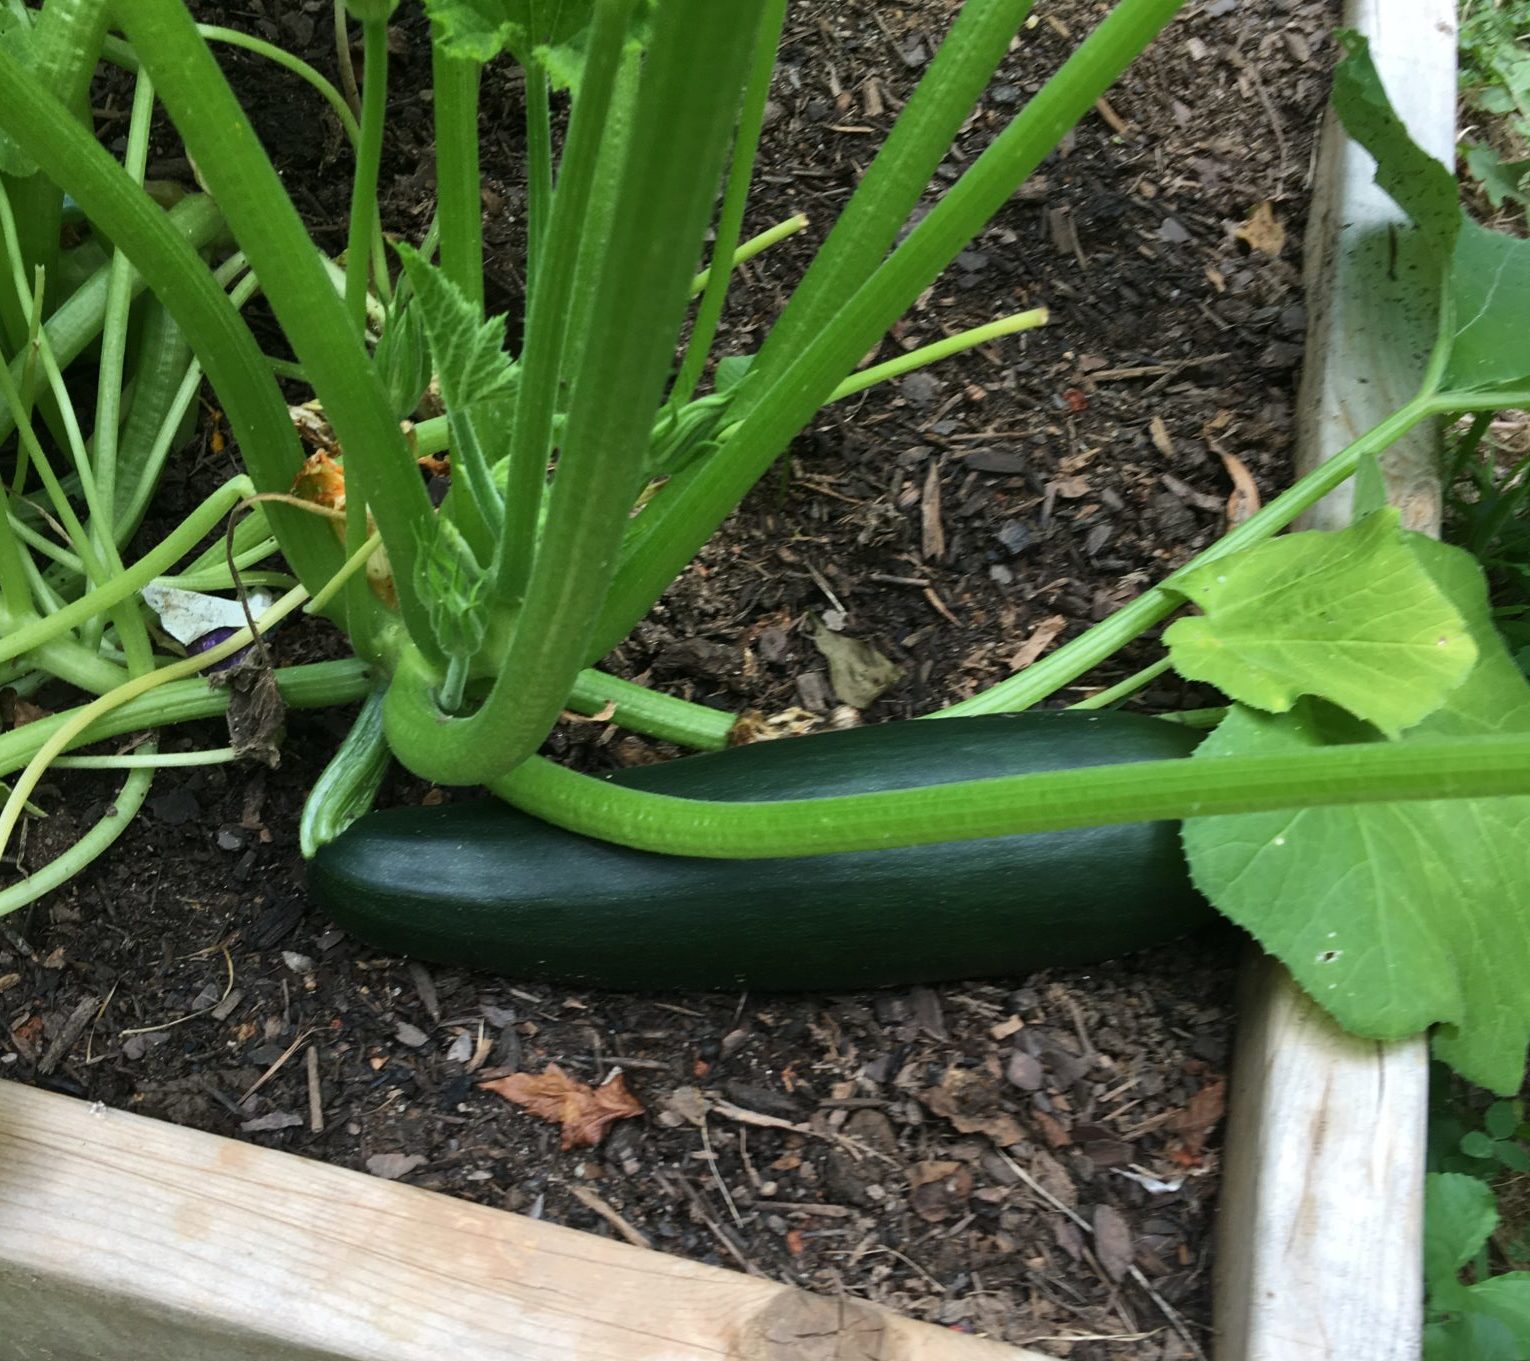 Courgette on the vine